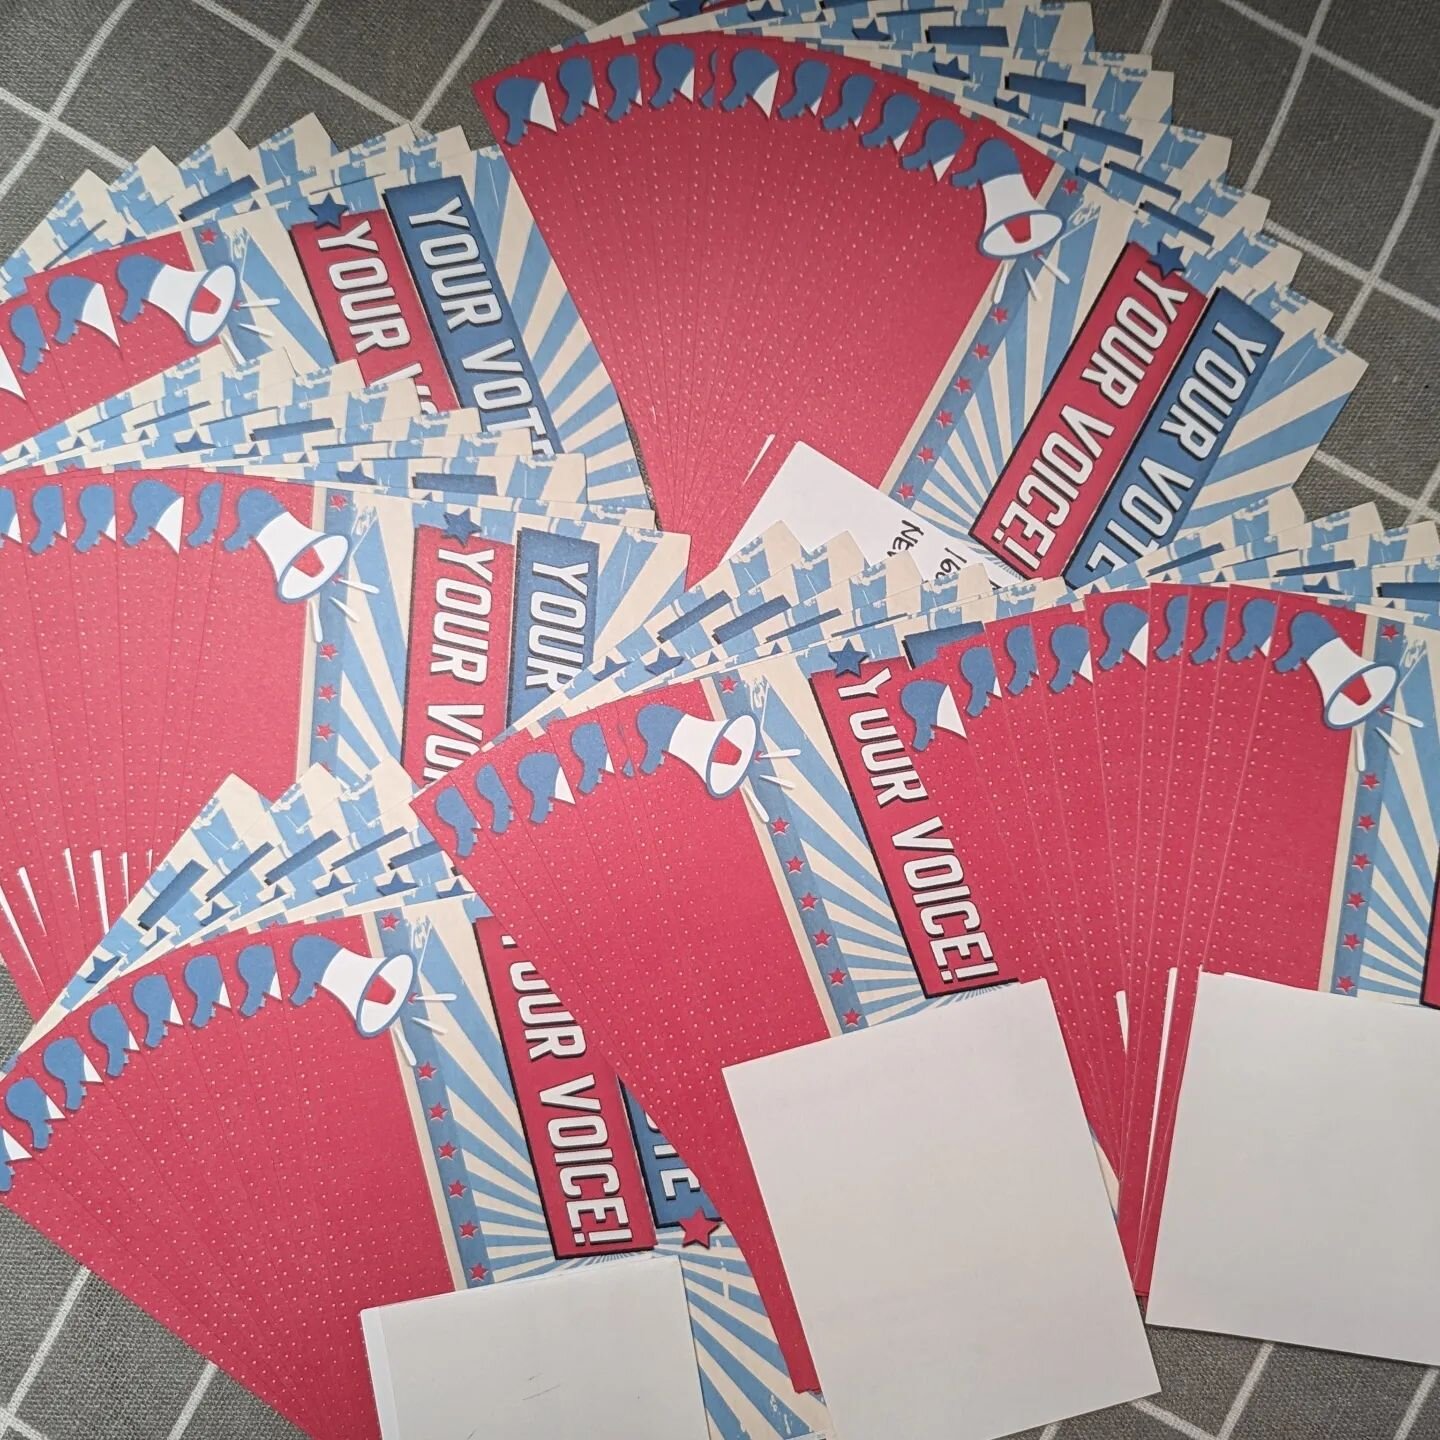 50 postcards to support Tom Suozzi in NY 3rd.  Early voting starts Saturday, special election day Feb. 13.  Still time to text and phone bank!  Let's flip George Santos's seat! And if not this race, there are many others this spring.  @activatevote